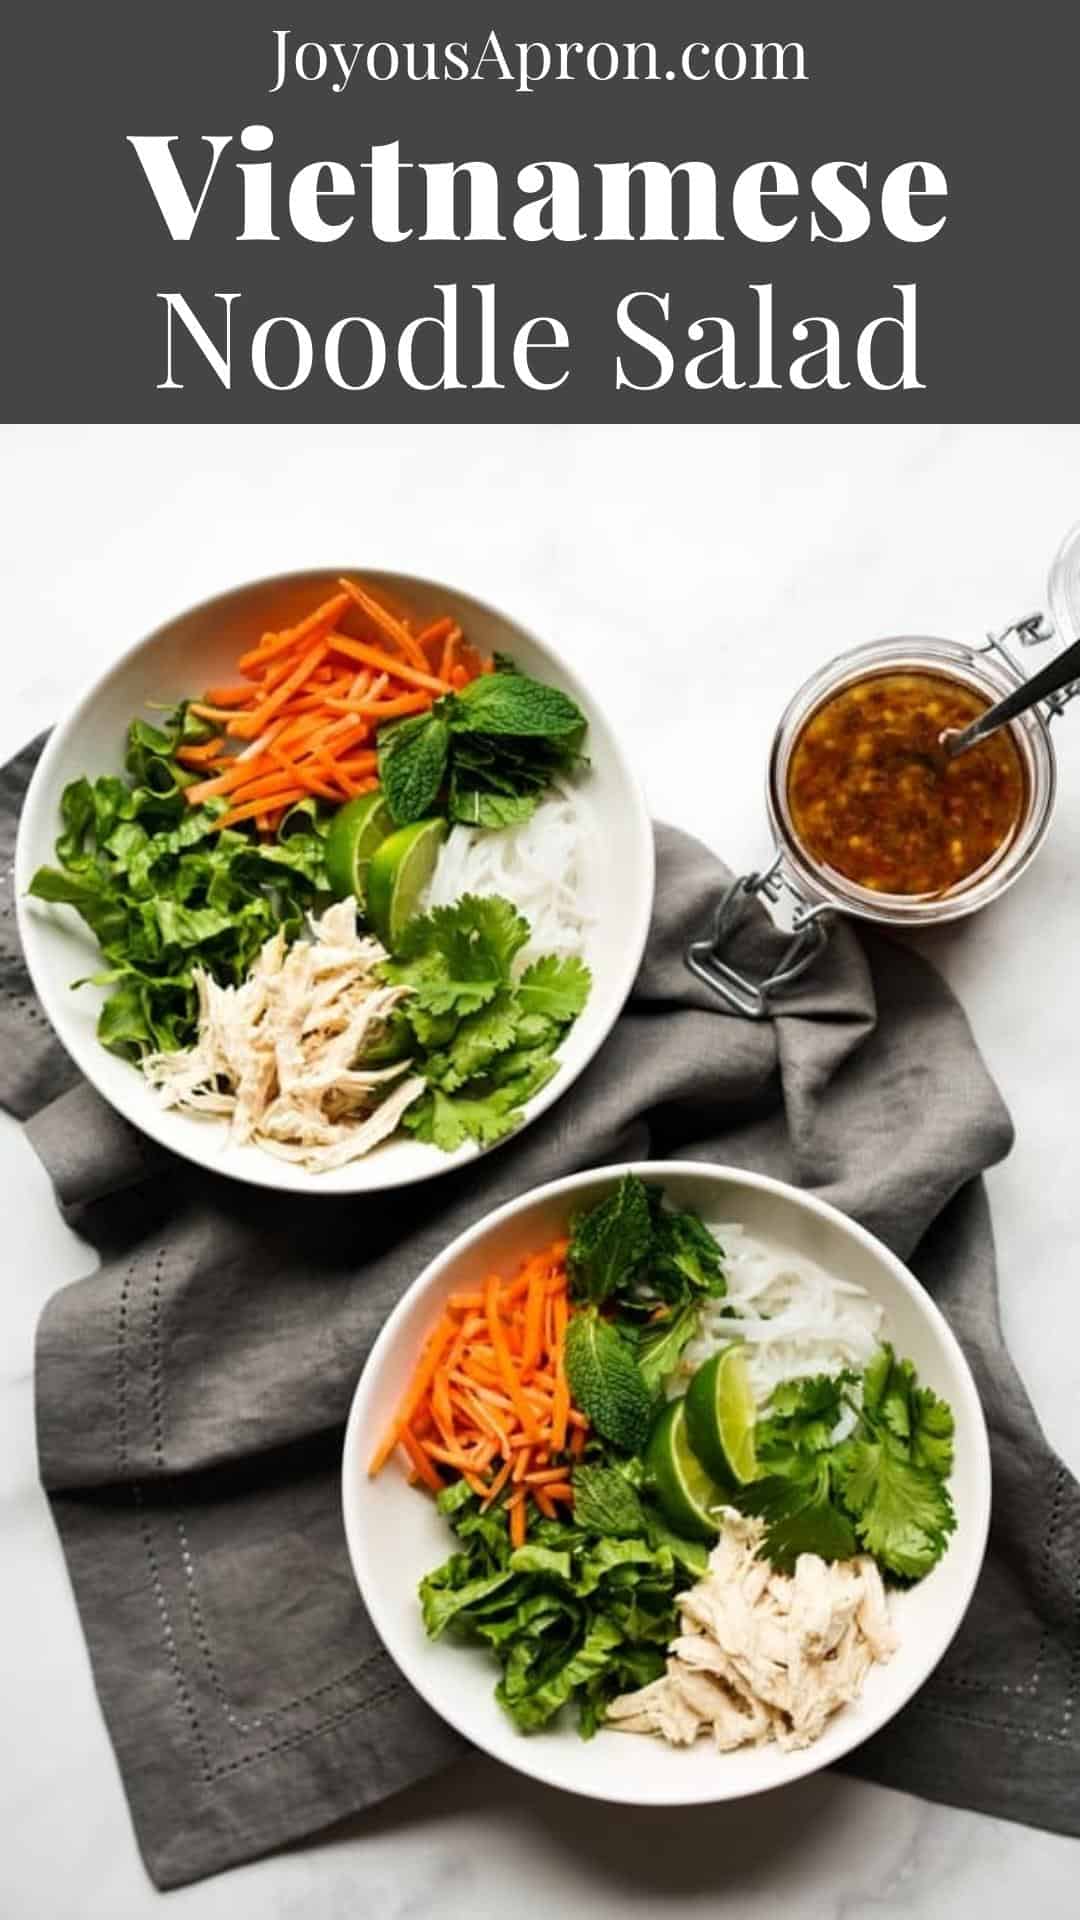 Vietnamese Noodle Salad - Fresh, healthy and delicious Asian inspired salad recipe! Vermicelli rice noodles combined with crunchy veggies tossed in a homemade bold-flavored dressing. via @joyousapron